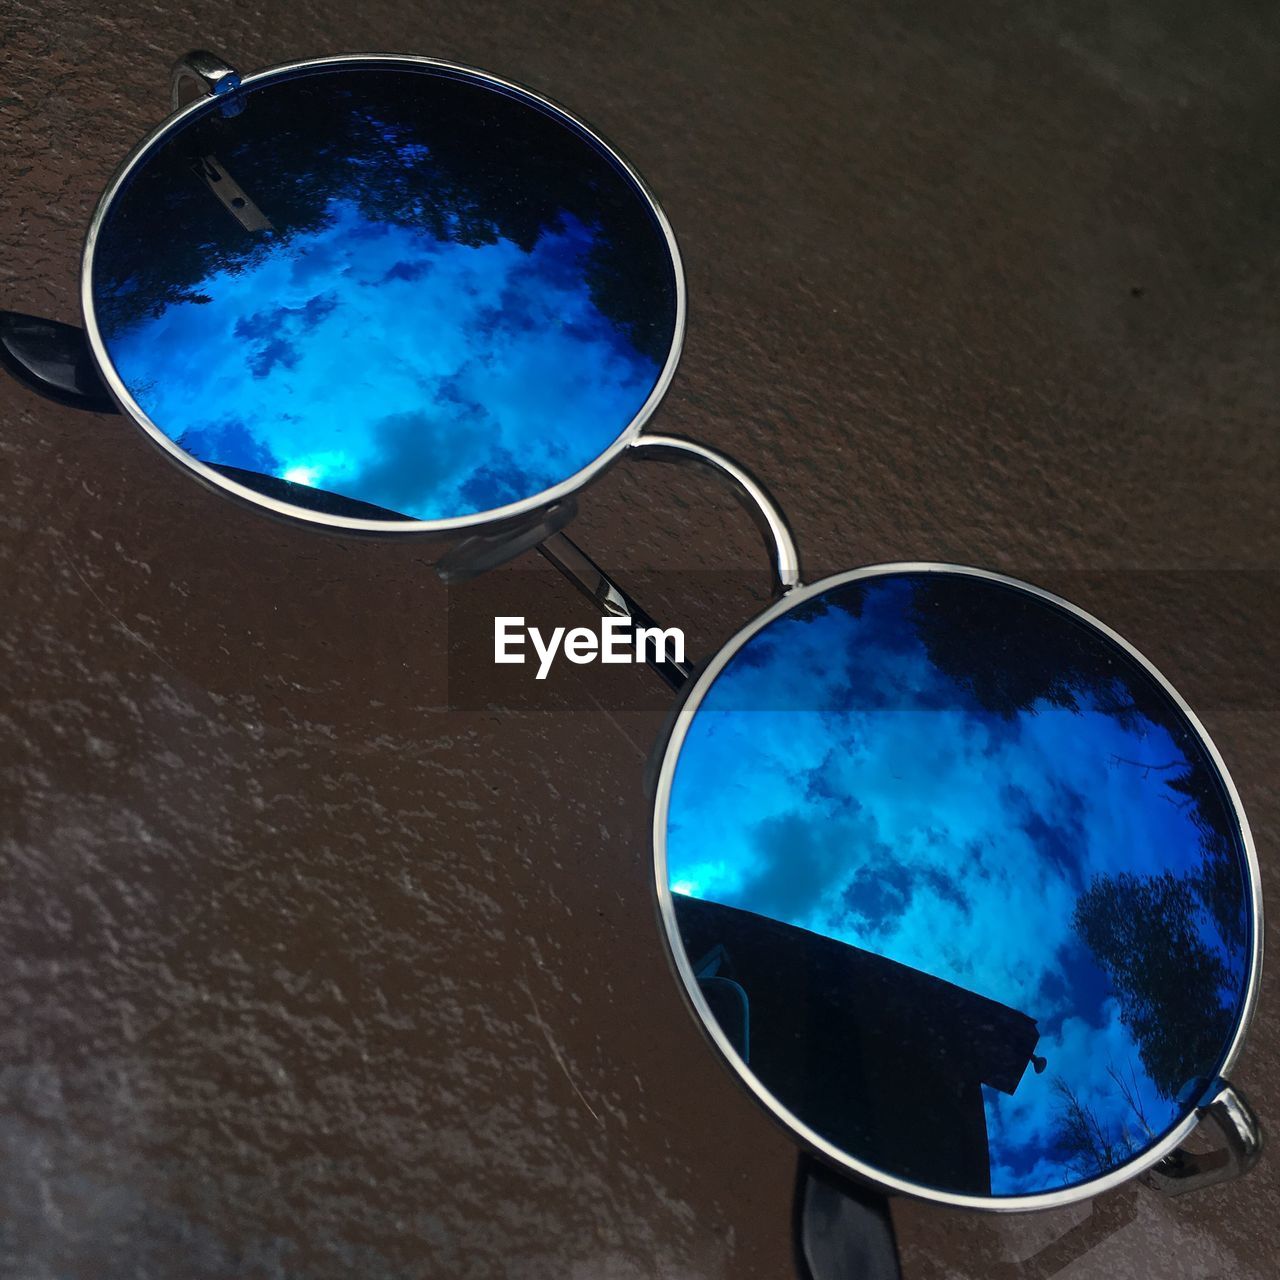 REFLECTION OF SUNGLASSES AND BLUE SKY ON MIRROR